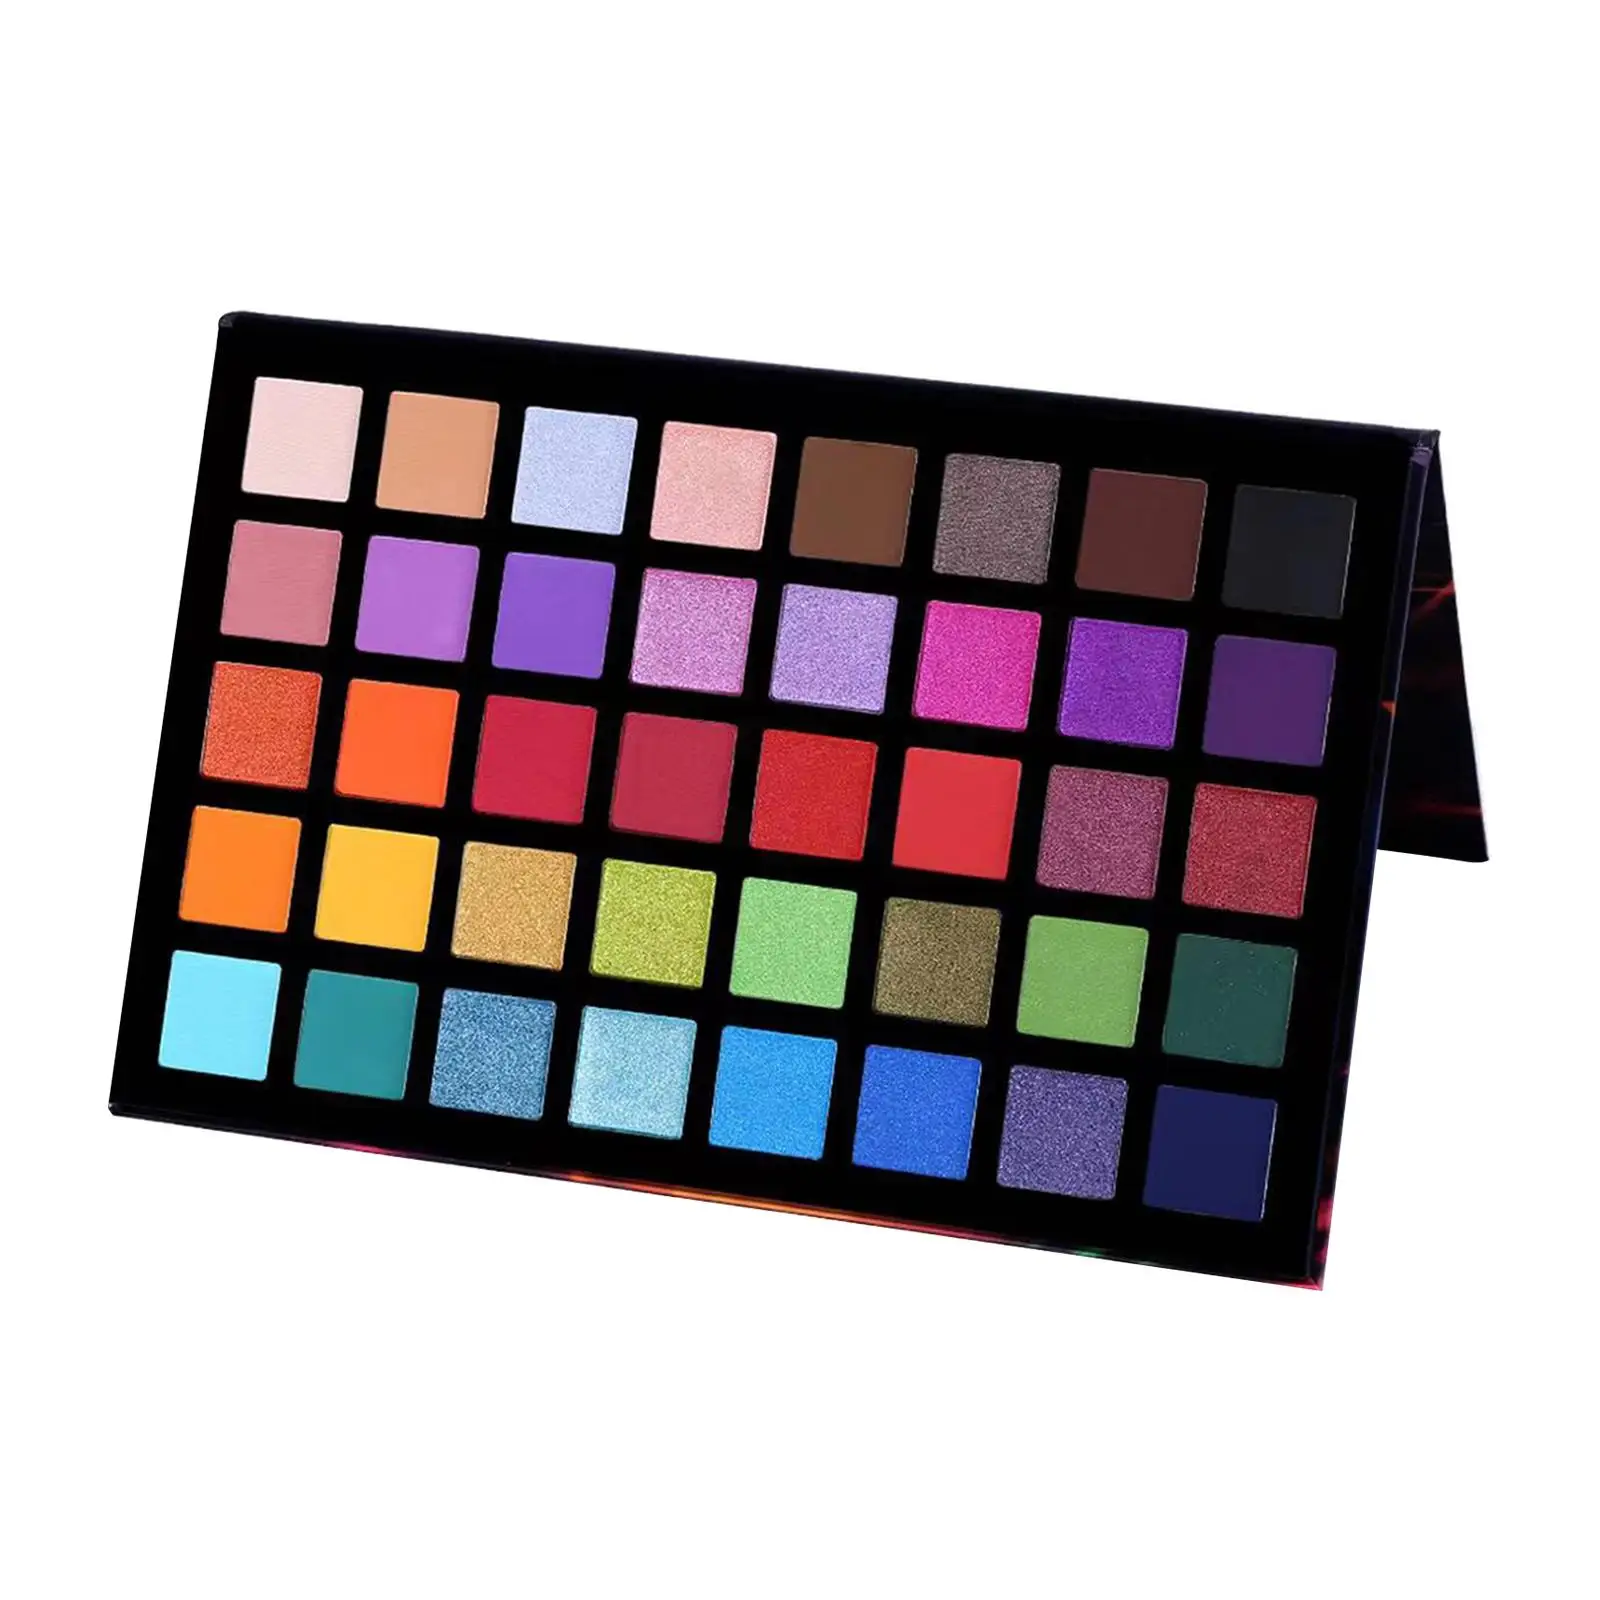 Eye Shadow Palette 40 Colors Long Lasting Soft Texture Matte Exotic Eye Shades Eye Shadow Makeup for Women Makeup Beginners